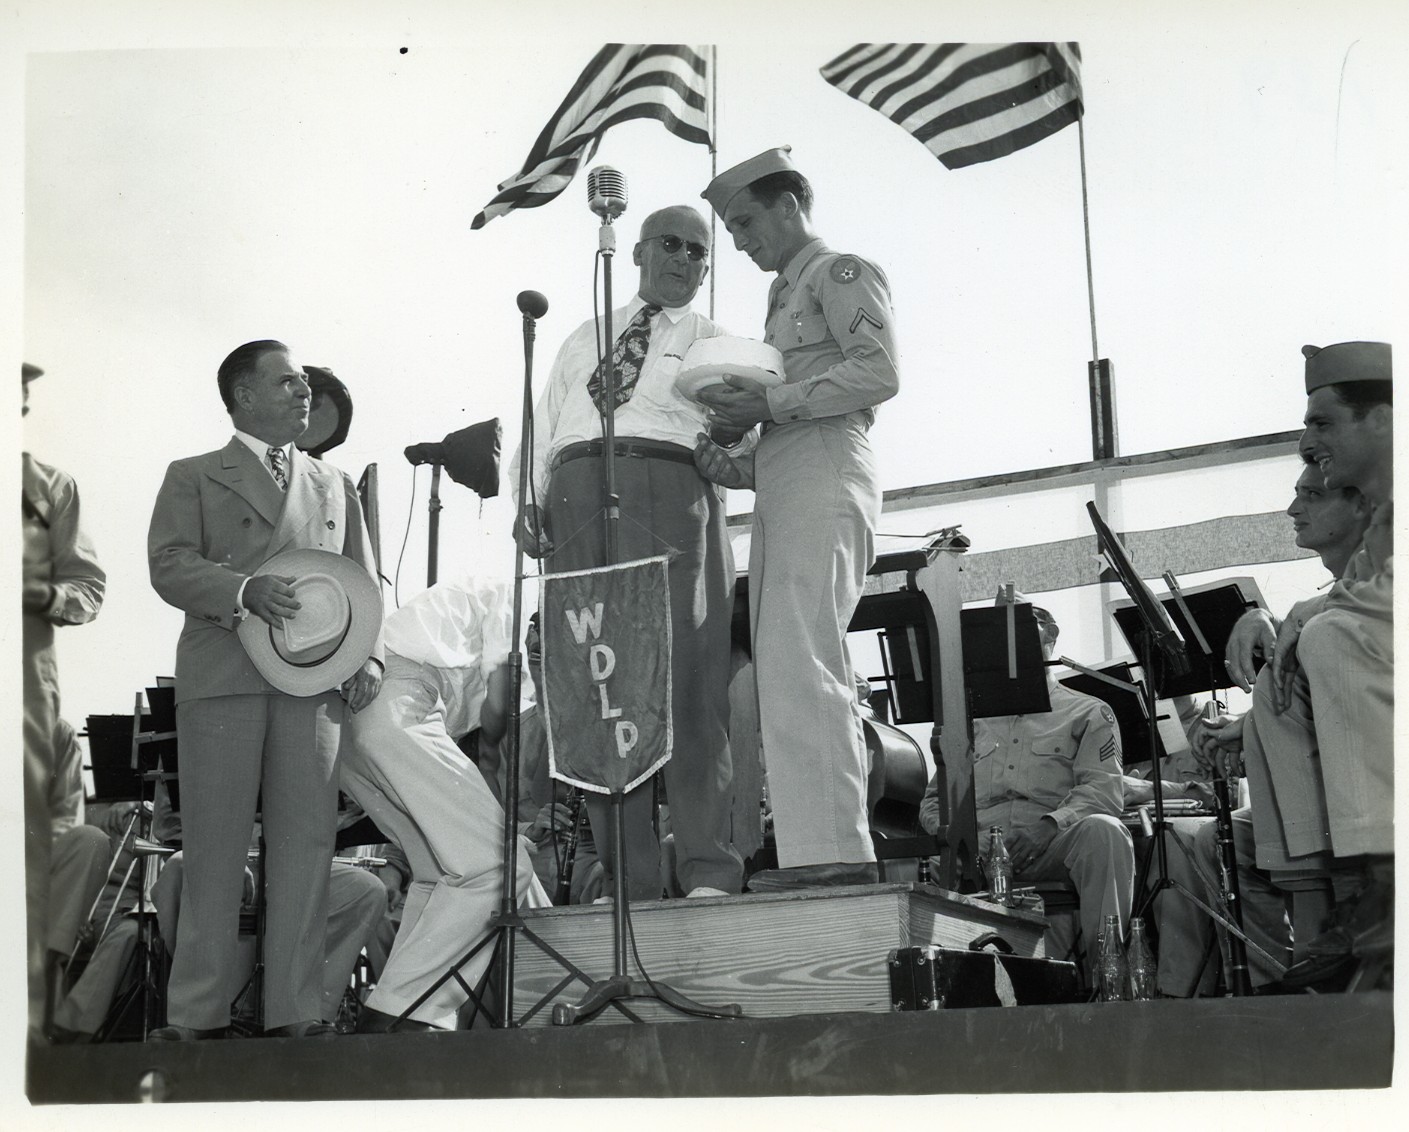 a vintage po of two men standing on a stage with flags in the background